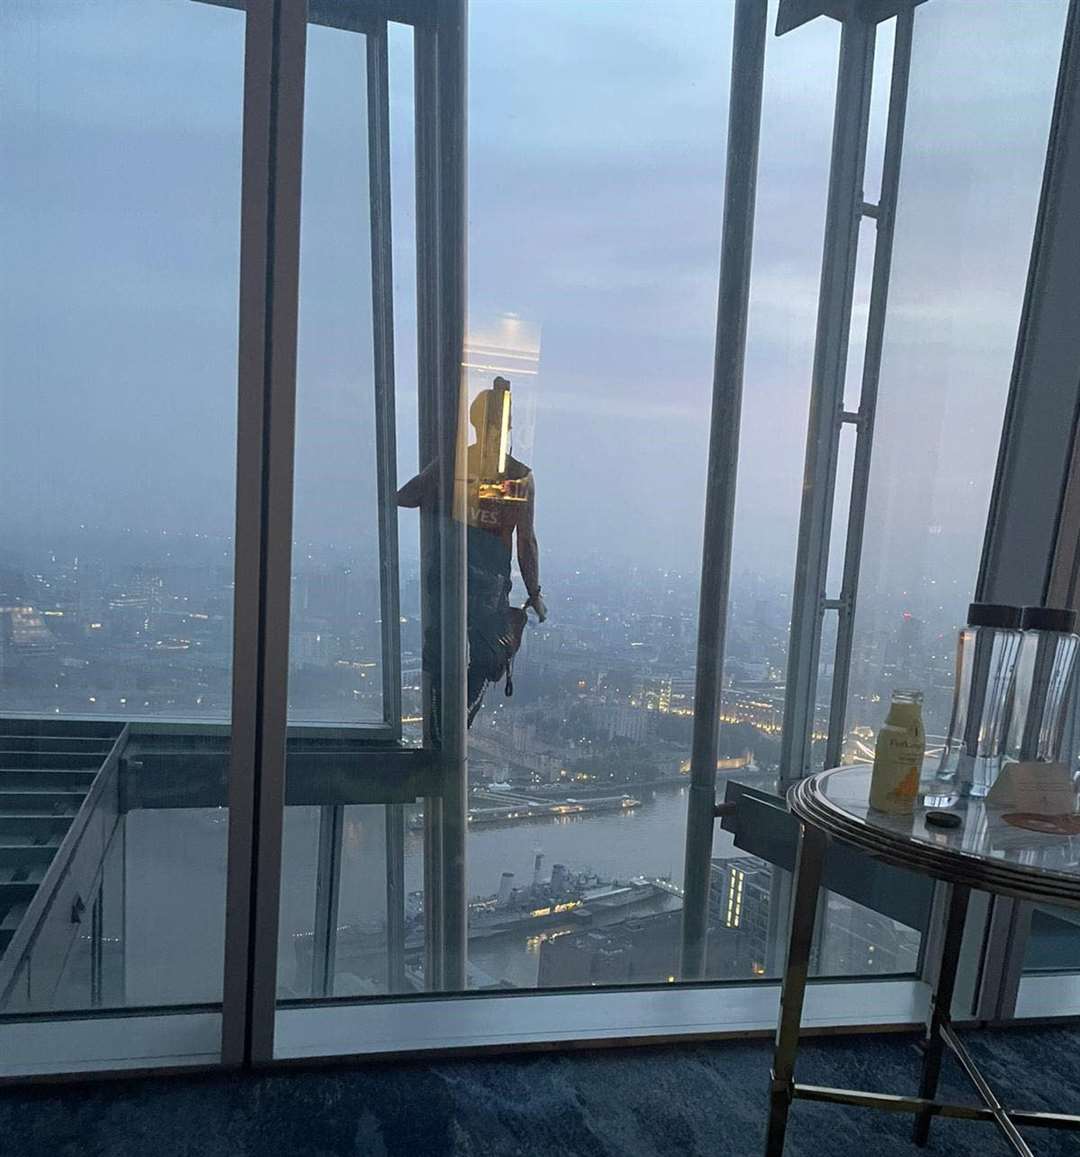 Paul Curphey was staying on the 40th floor of The Shard when someone stopped to wave (Paul Curphey/PA)